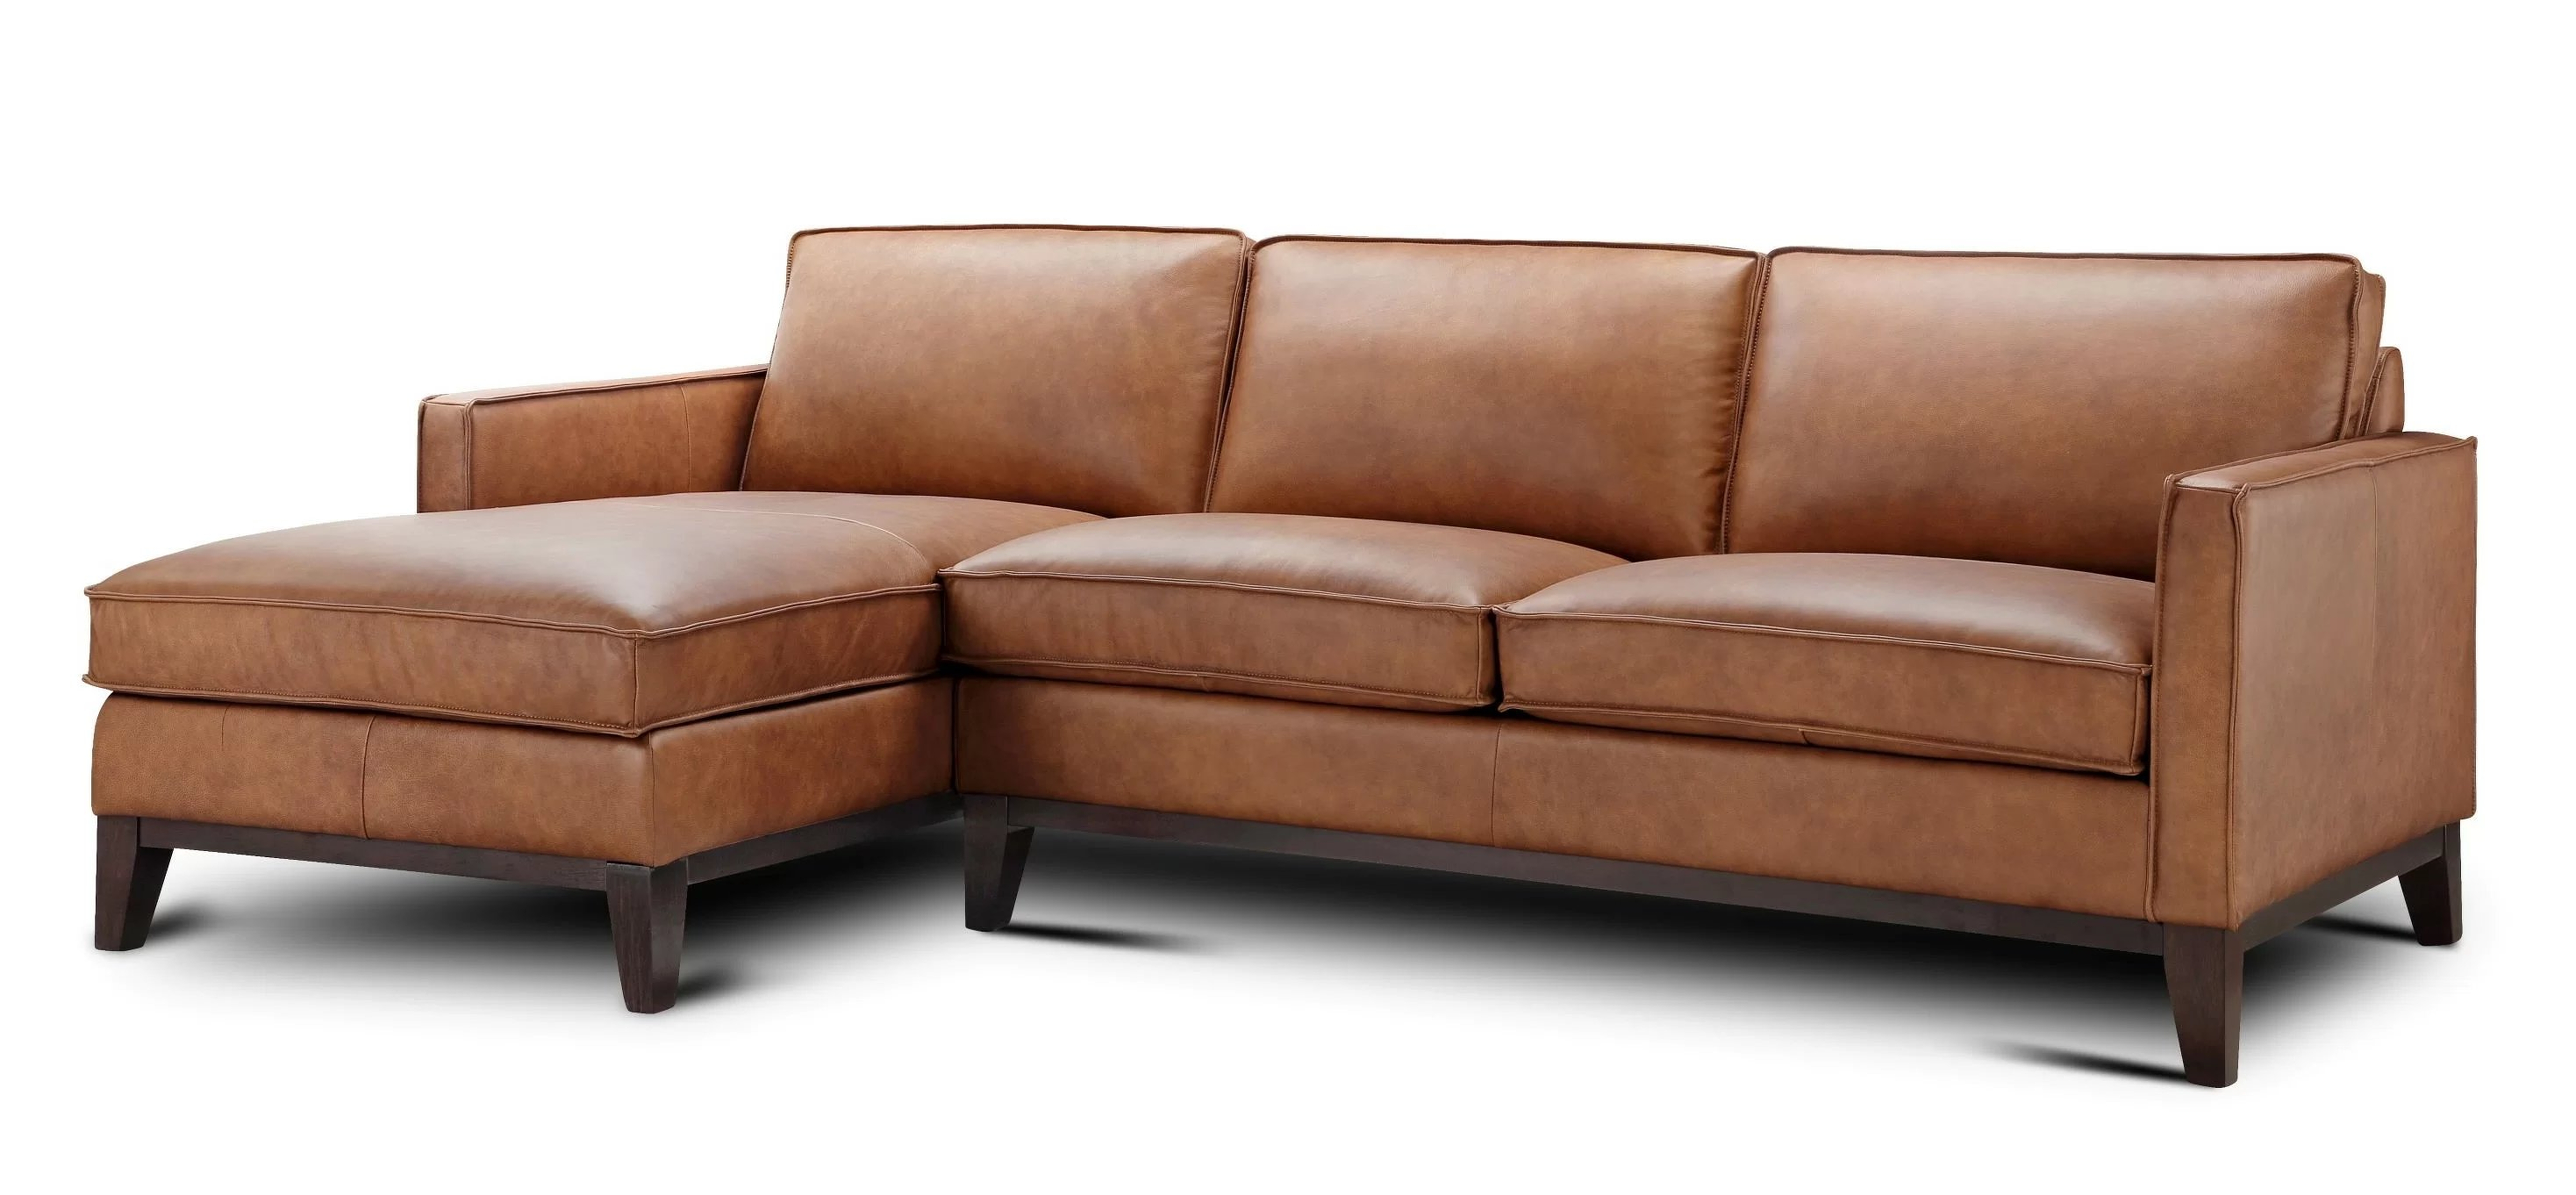 Zoticus 100" Wide Genuine Leather Sofa & Chaise - Wayfair